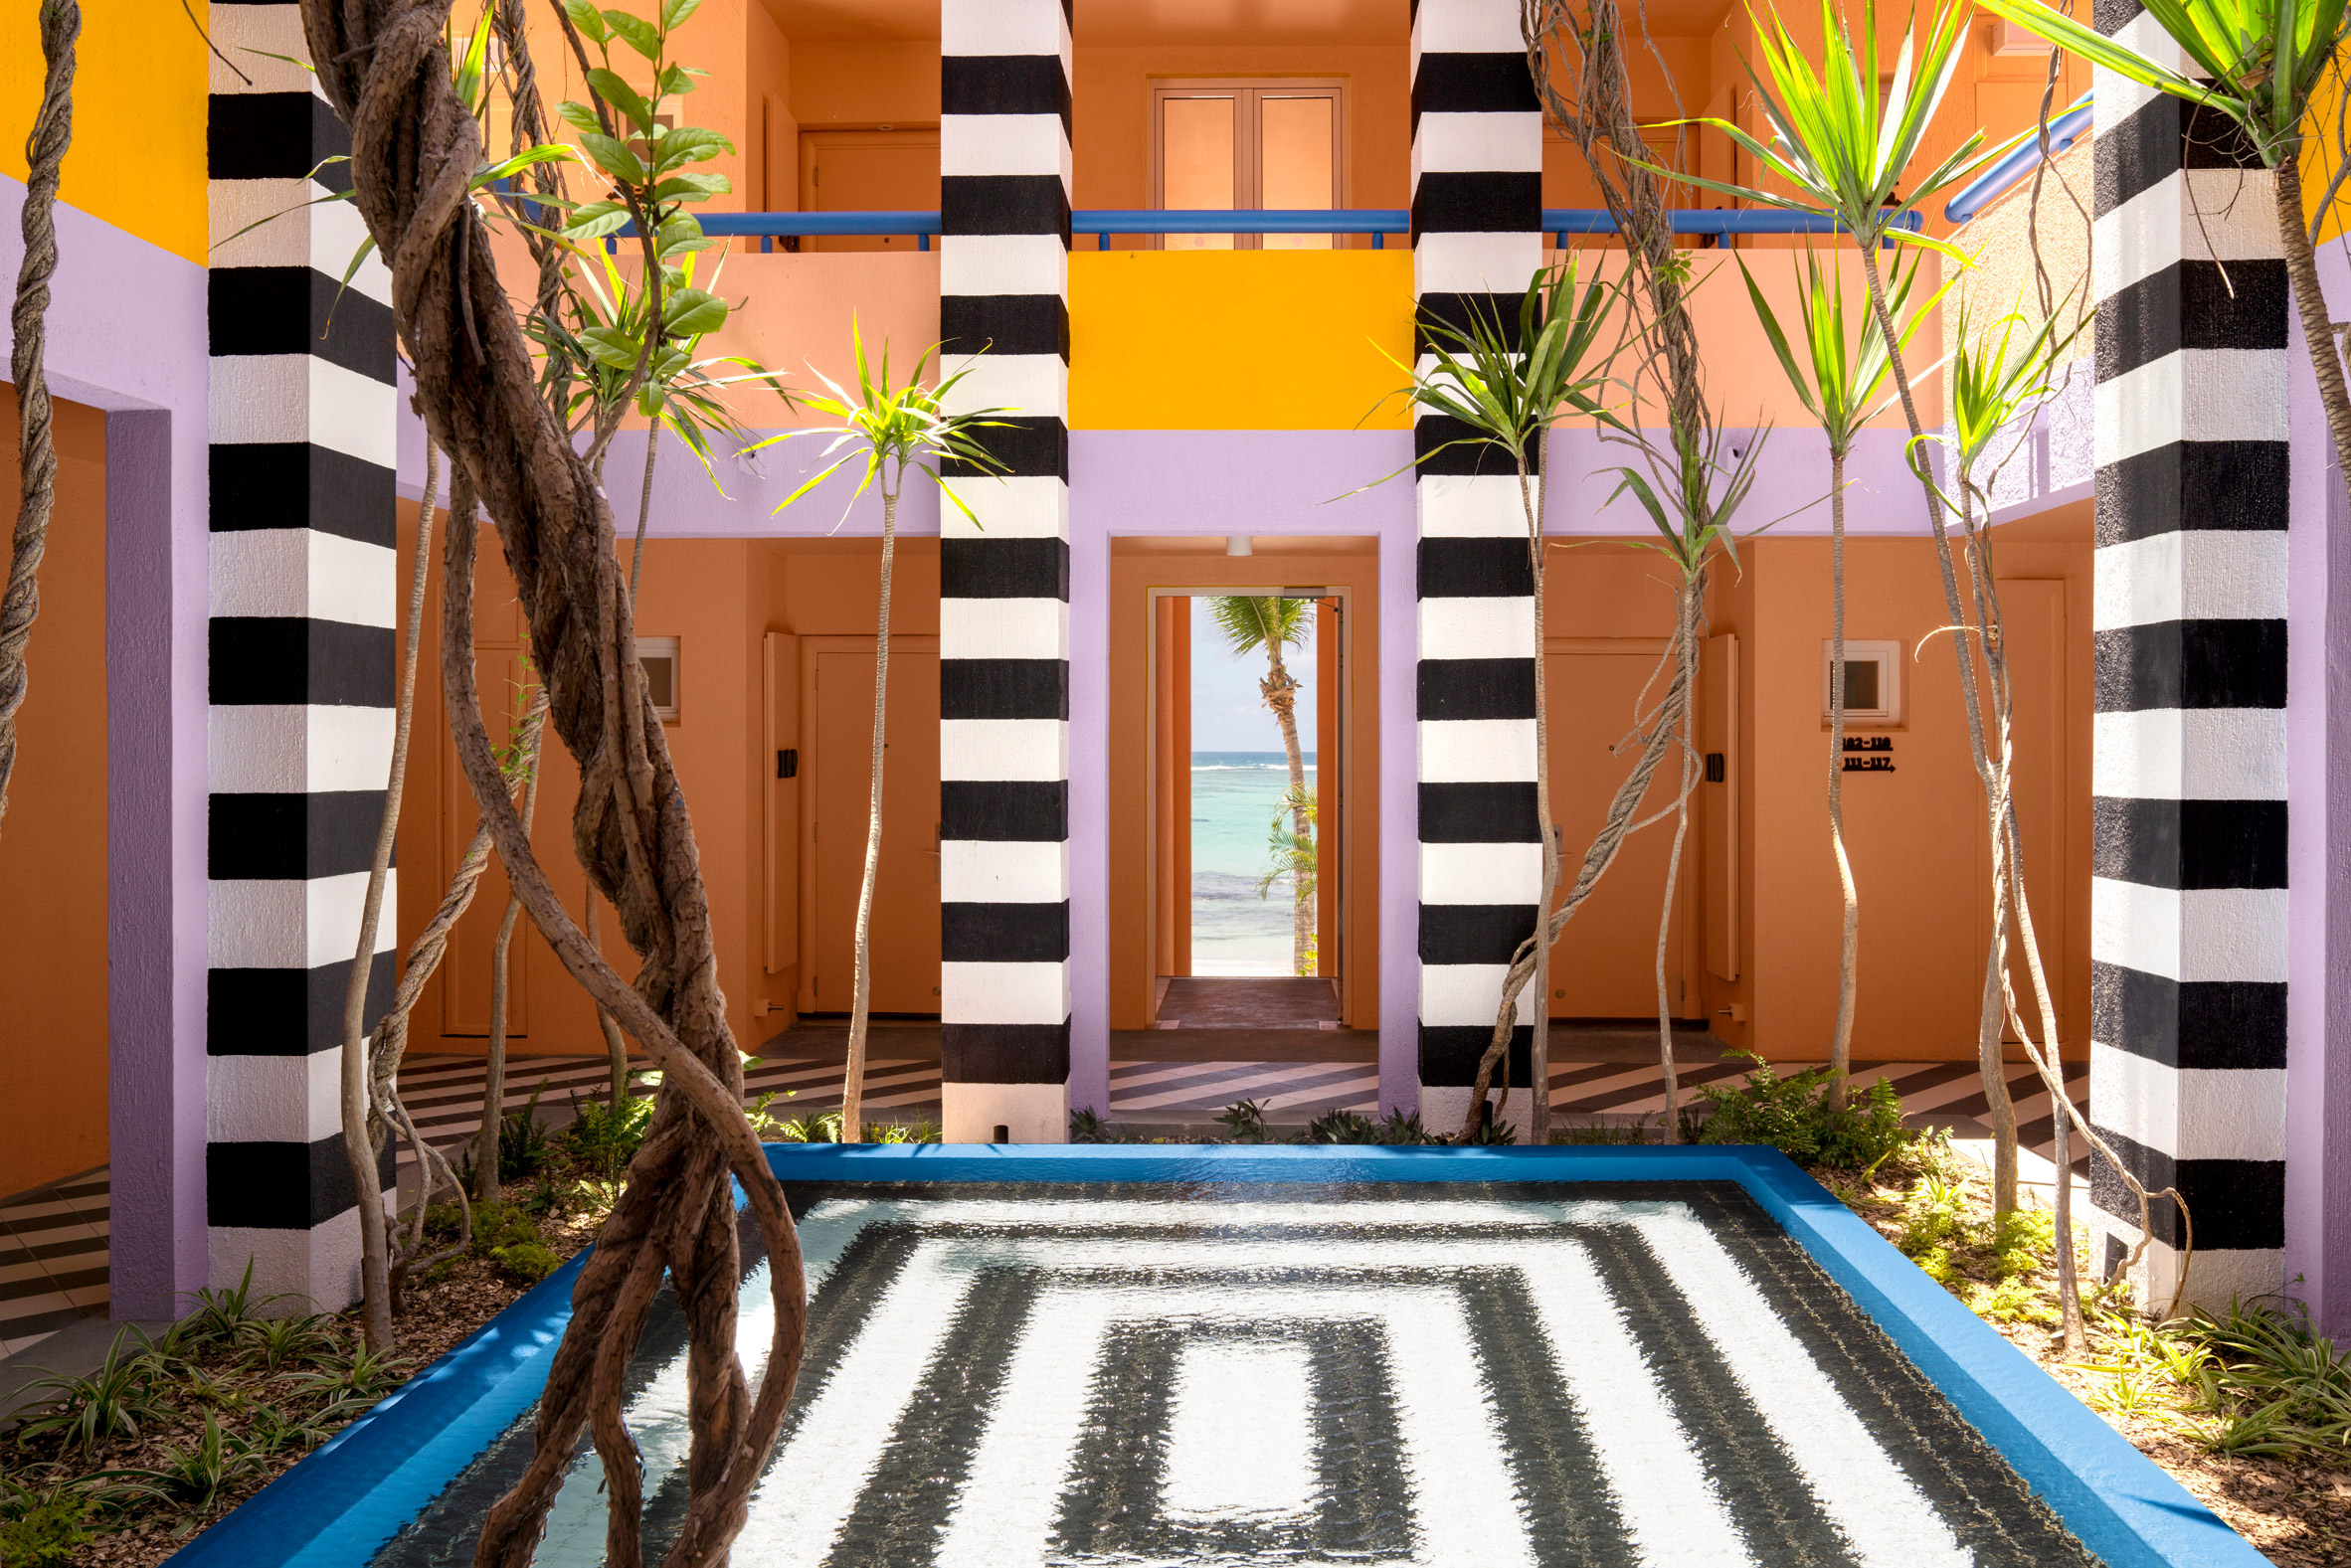 Time magazine's World's Greatest Places of 2019: Interiors of SALT of Palmar hotel, Mauritius, by Camille Walala